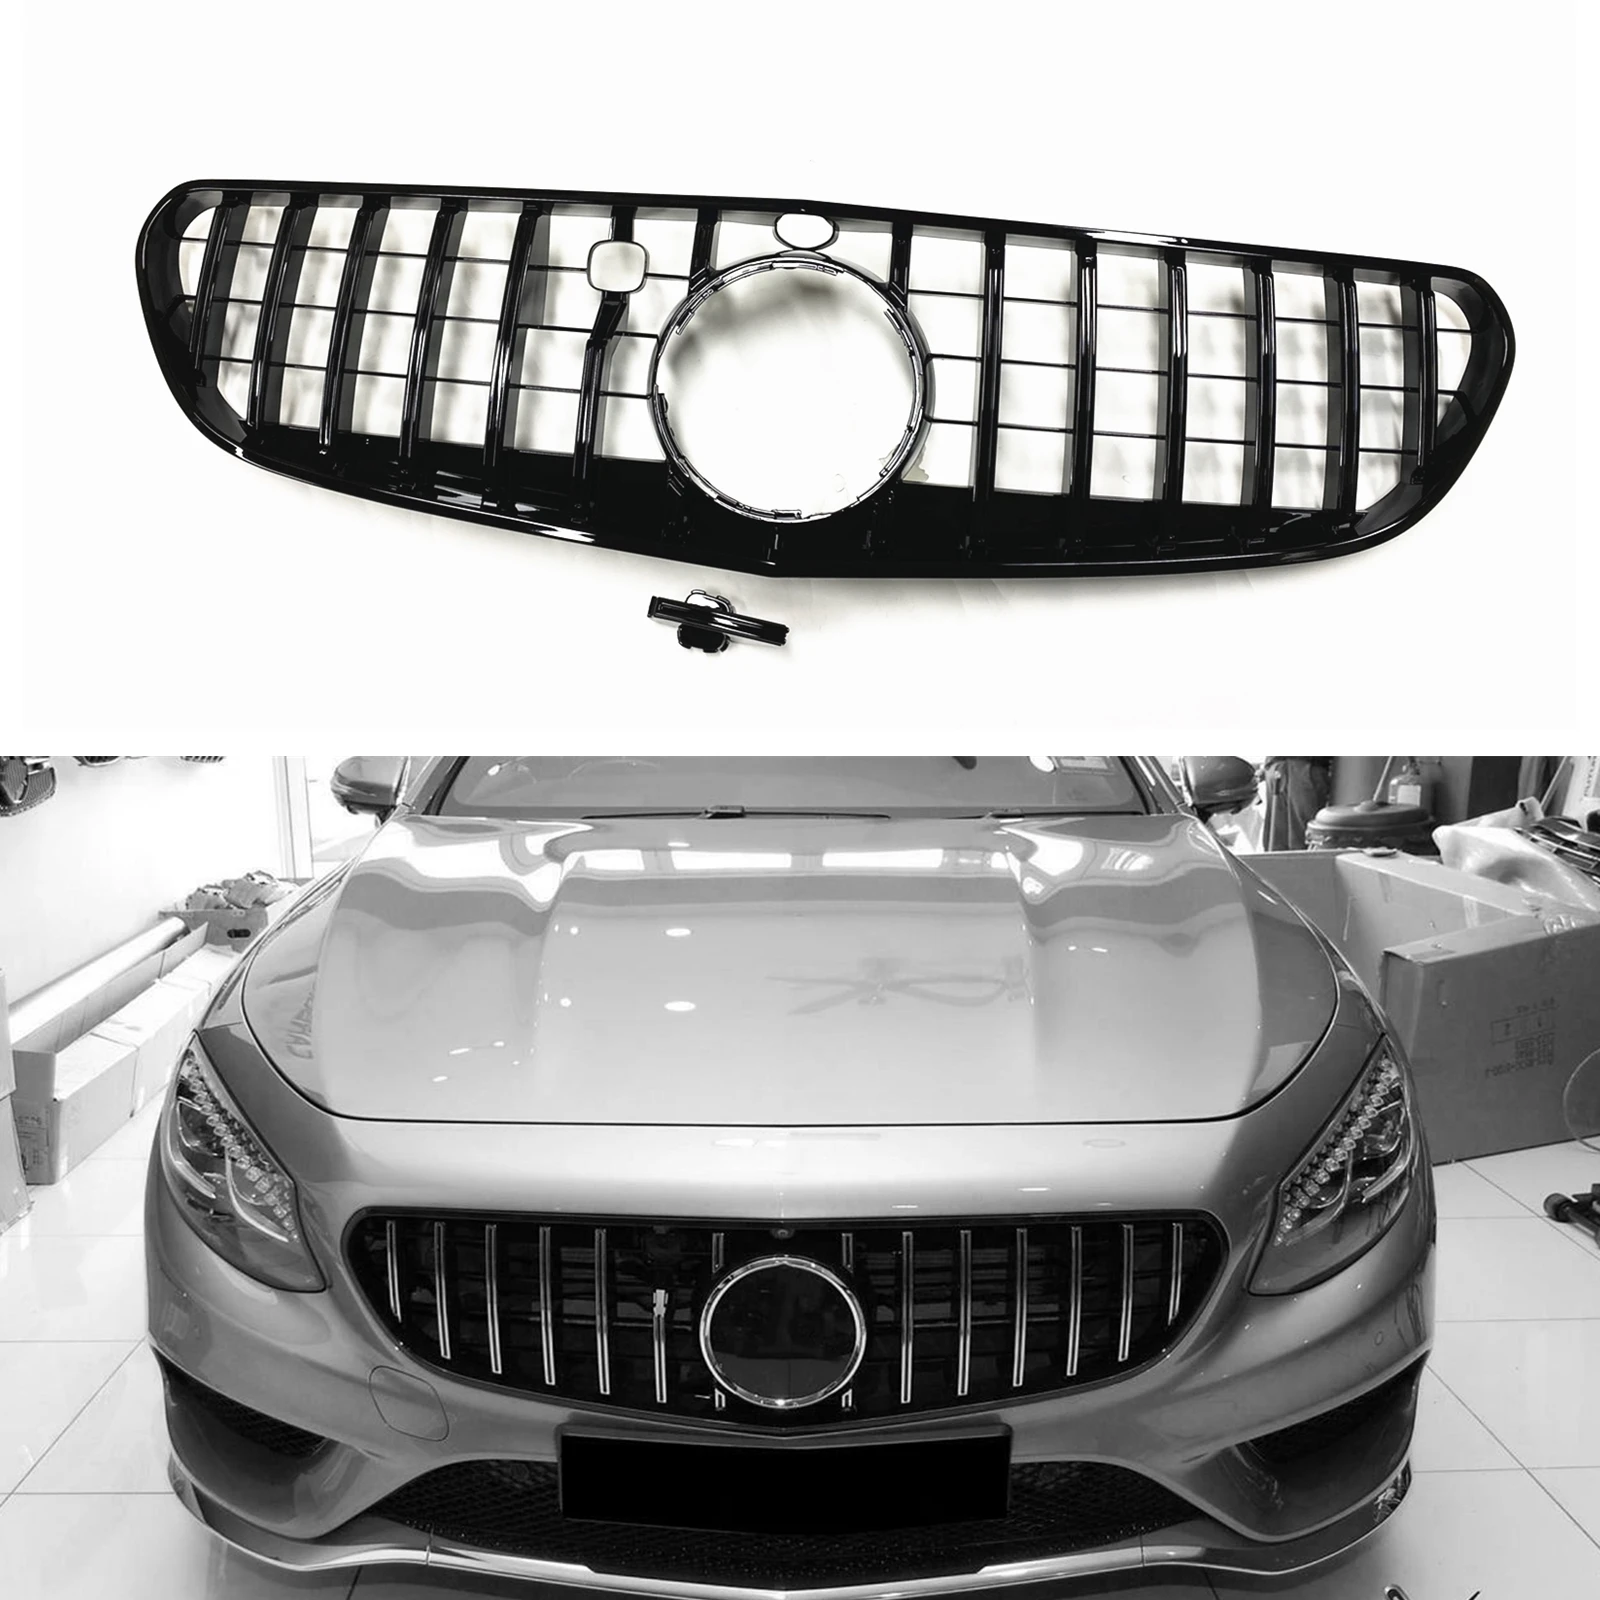 

Front Grille Grill For Mercedes-Benz C217 W217 S Coupe Class 2015-2017 S500 GT Black/Silver Car Upper Bumper Hood Mesh Grid Kit